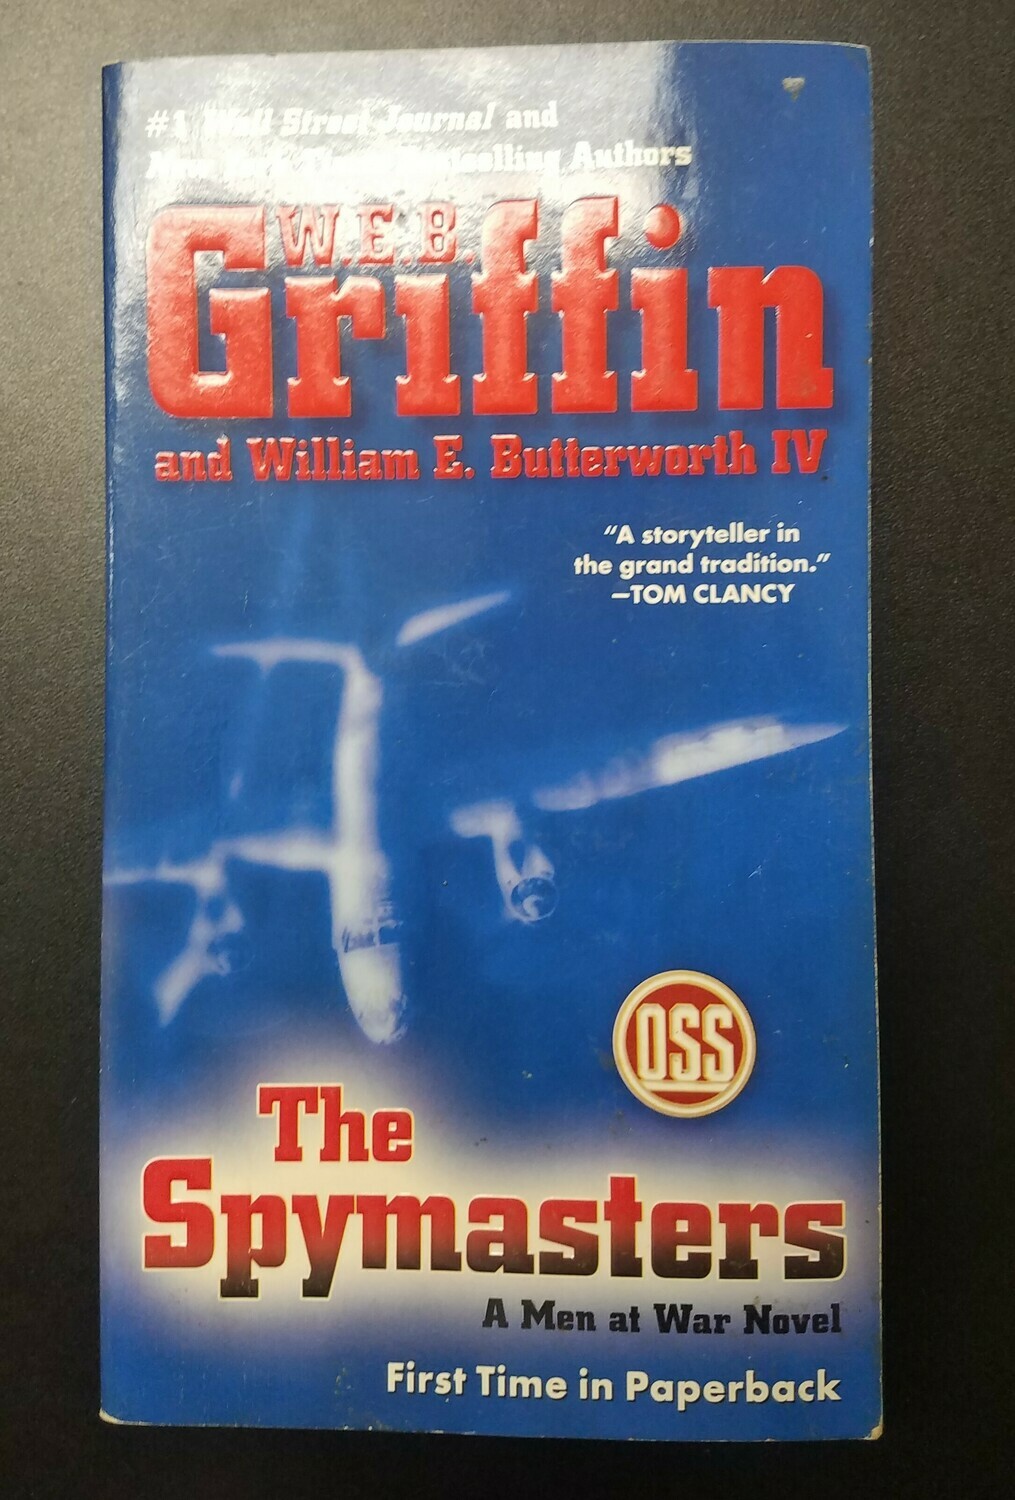 The Spymasters by W.E.B. Griffin and William E. Butterworth IV